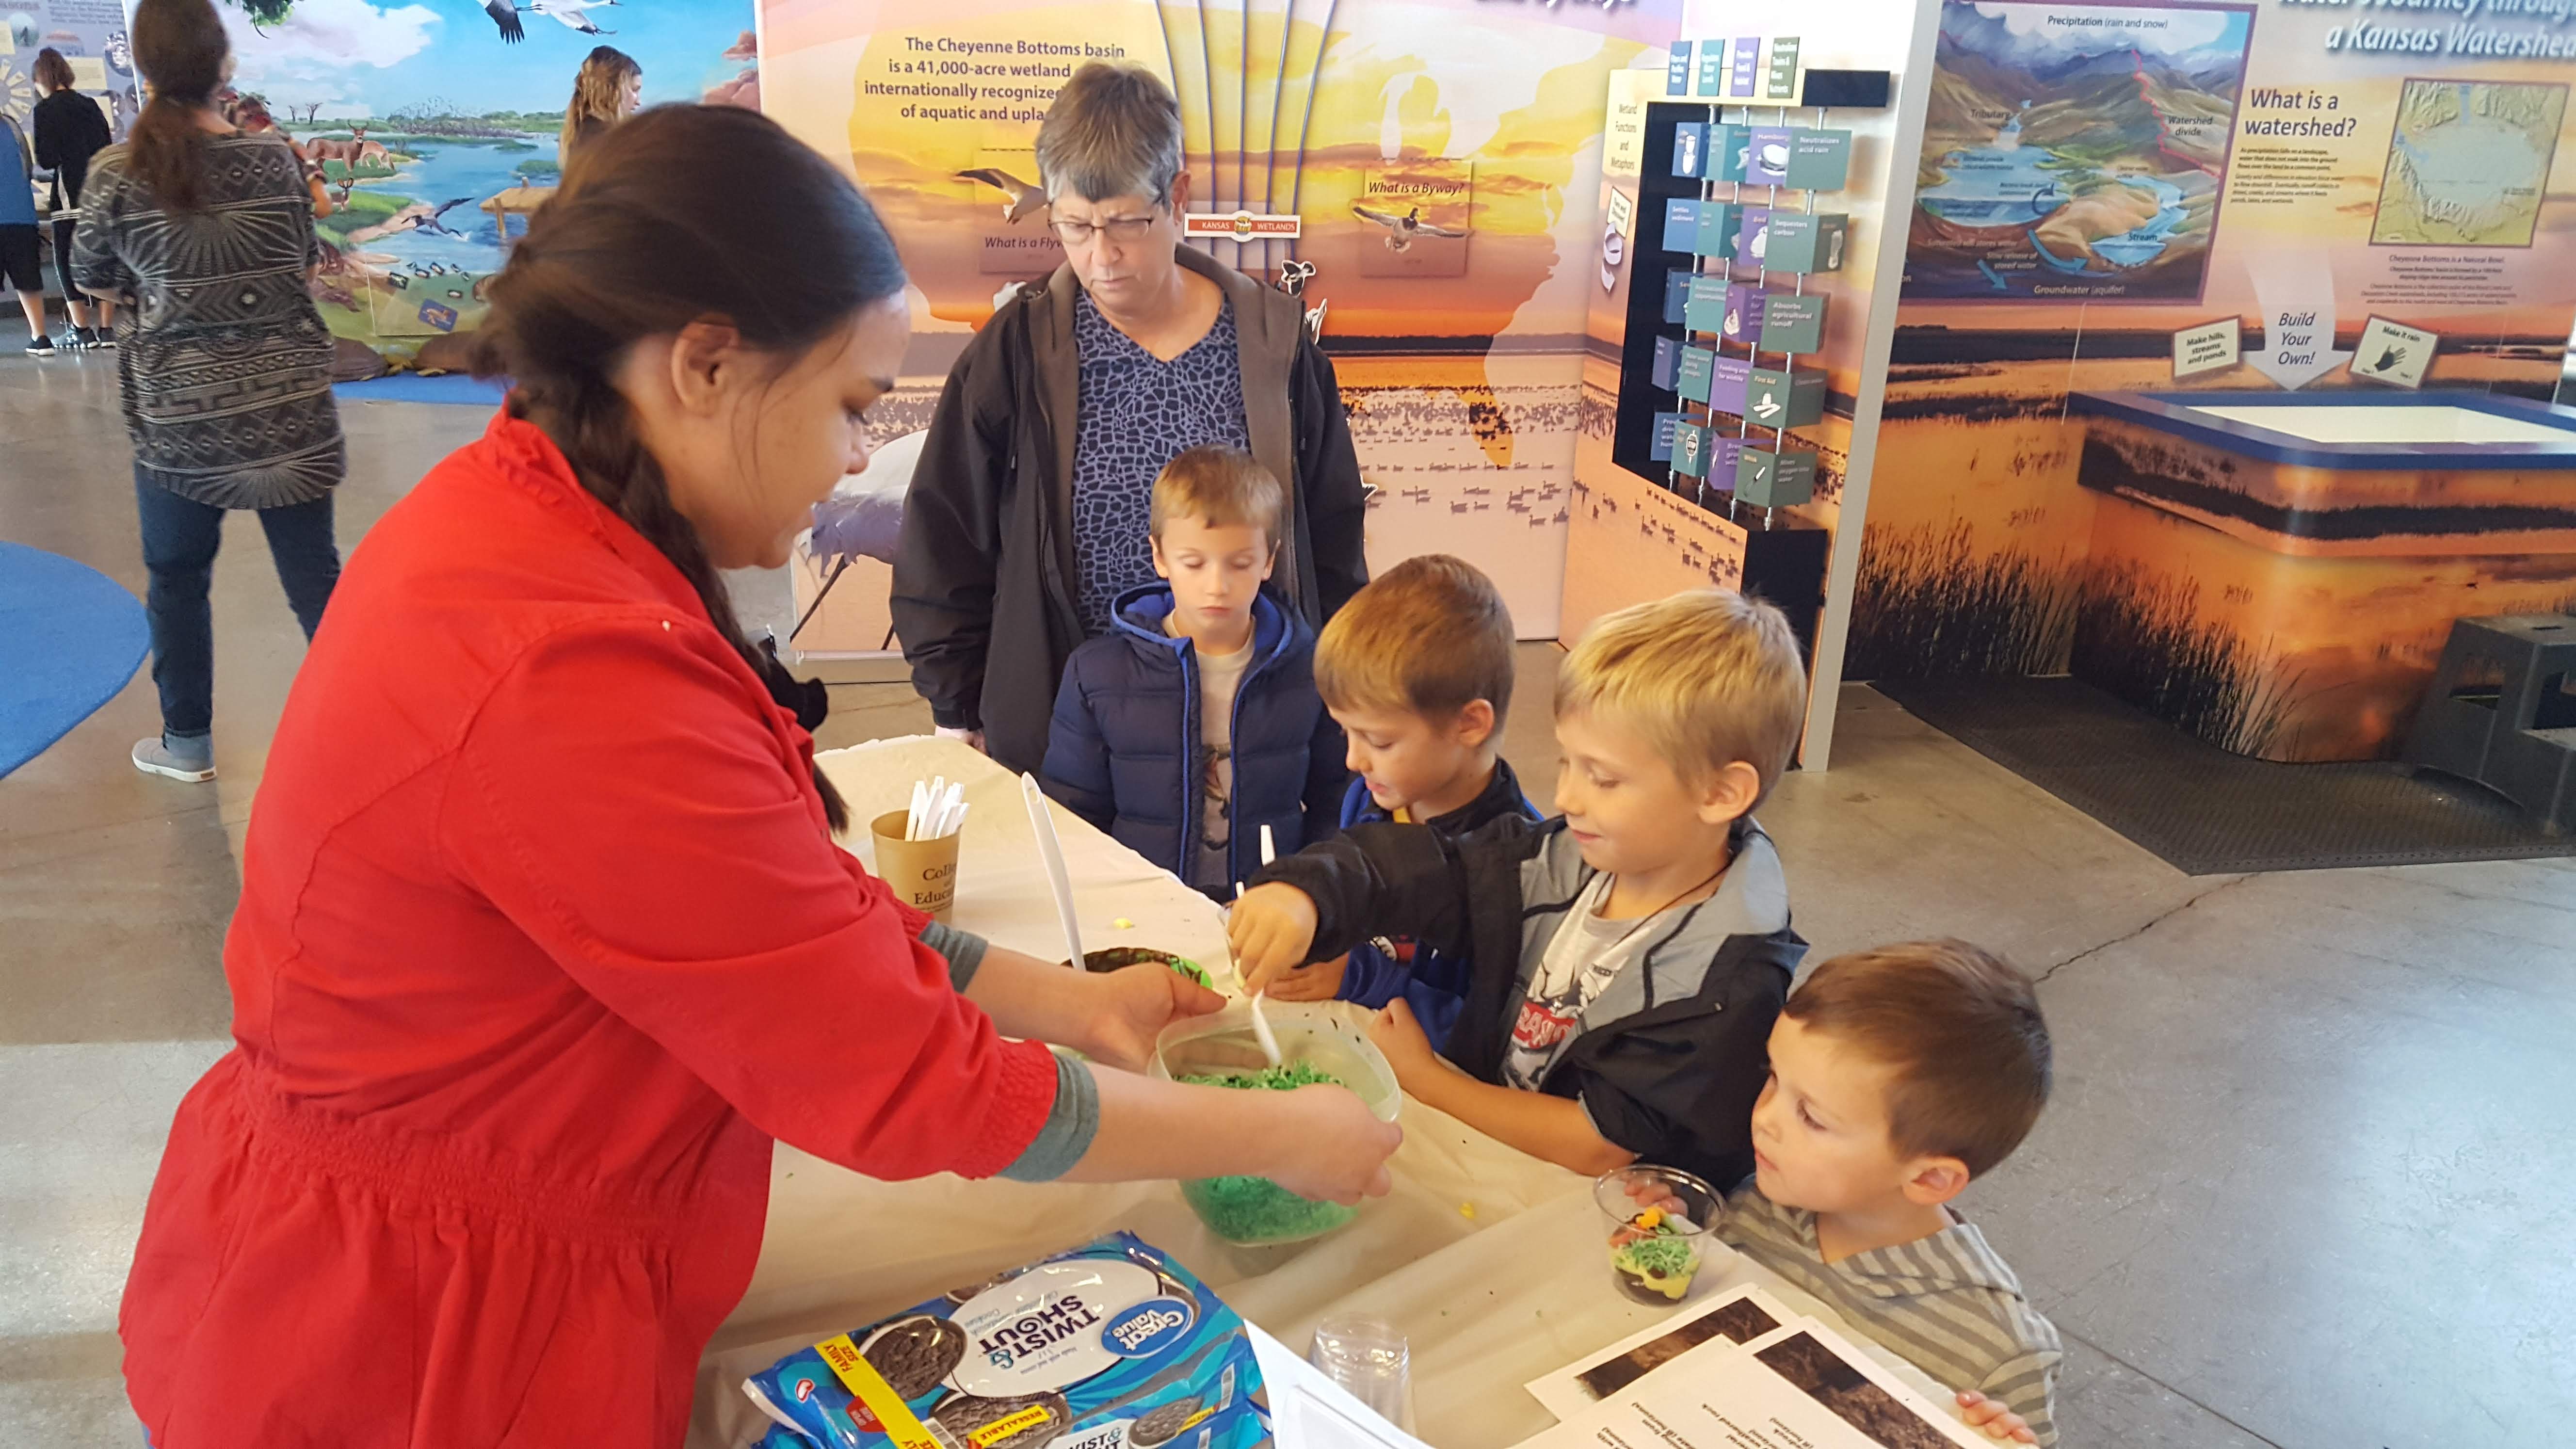 Hands-on STEM activities will fill the exhibit hall at the Kansas Wetlands Education Center on the afternoon of Oct. 22.